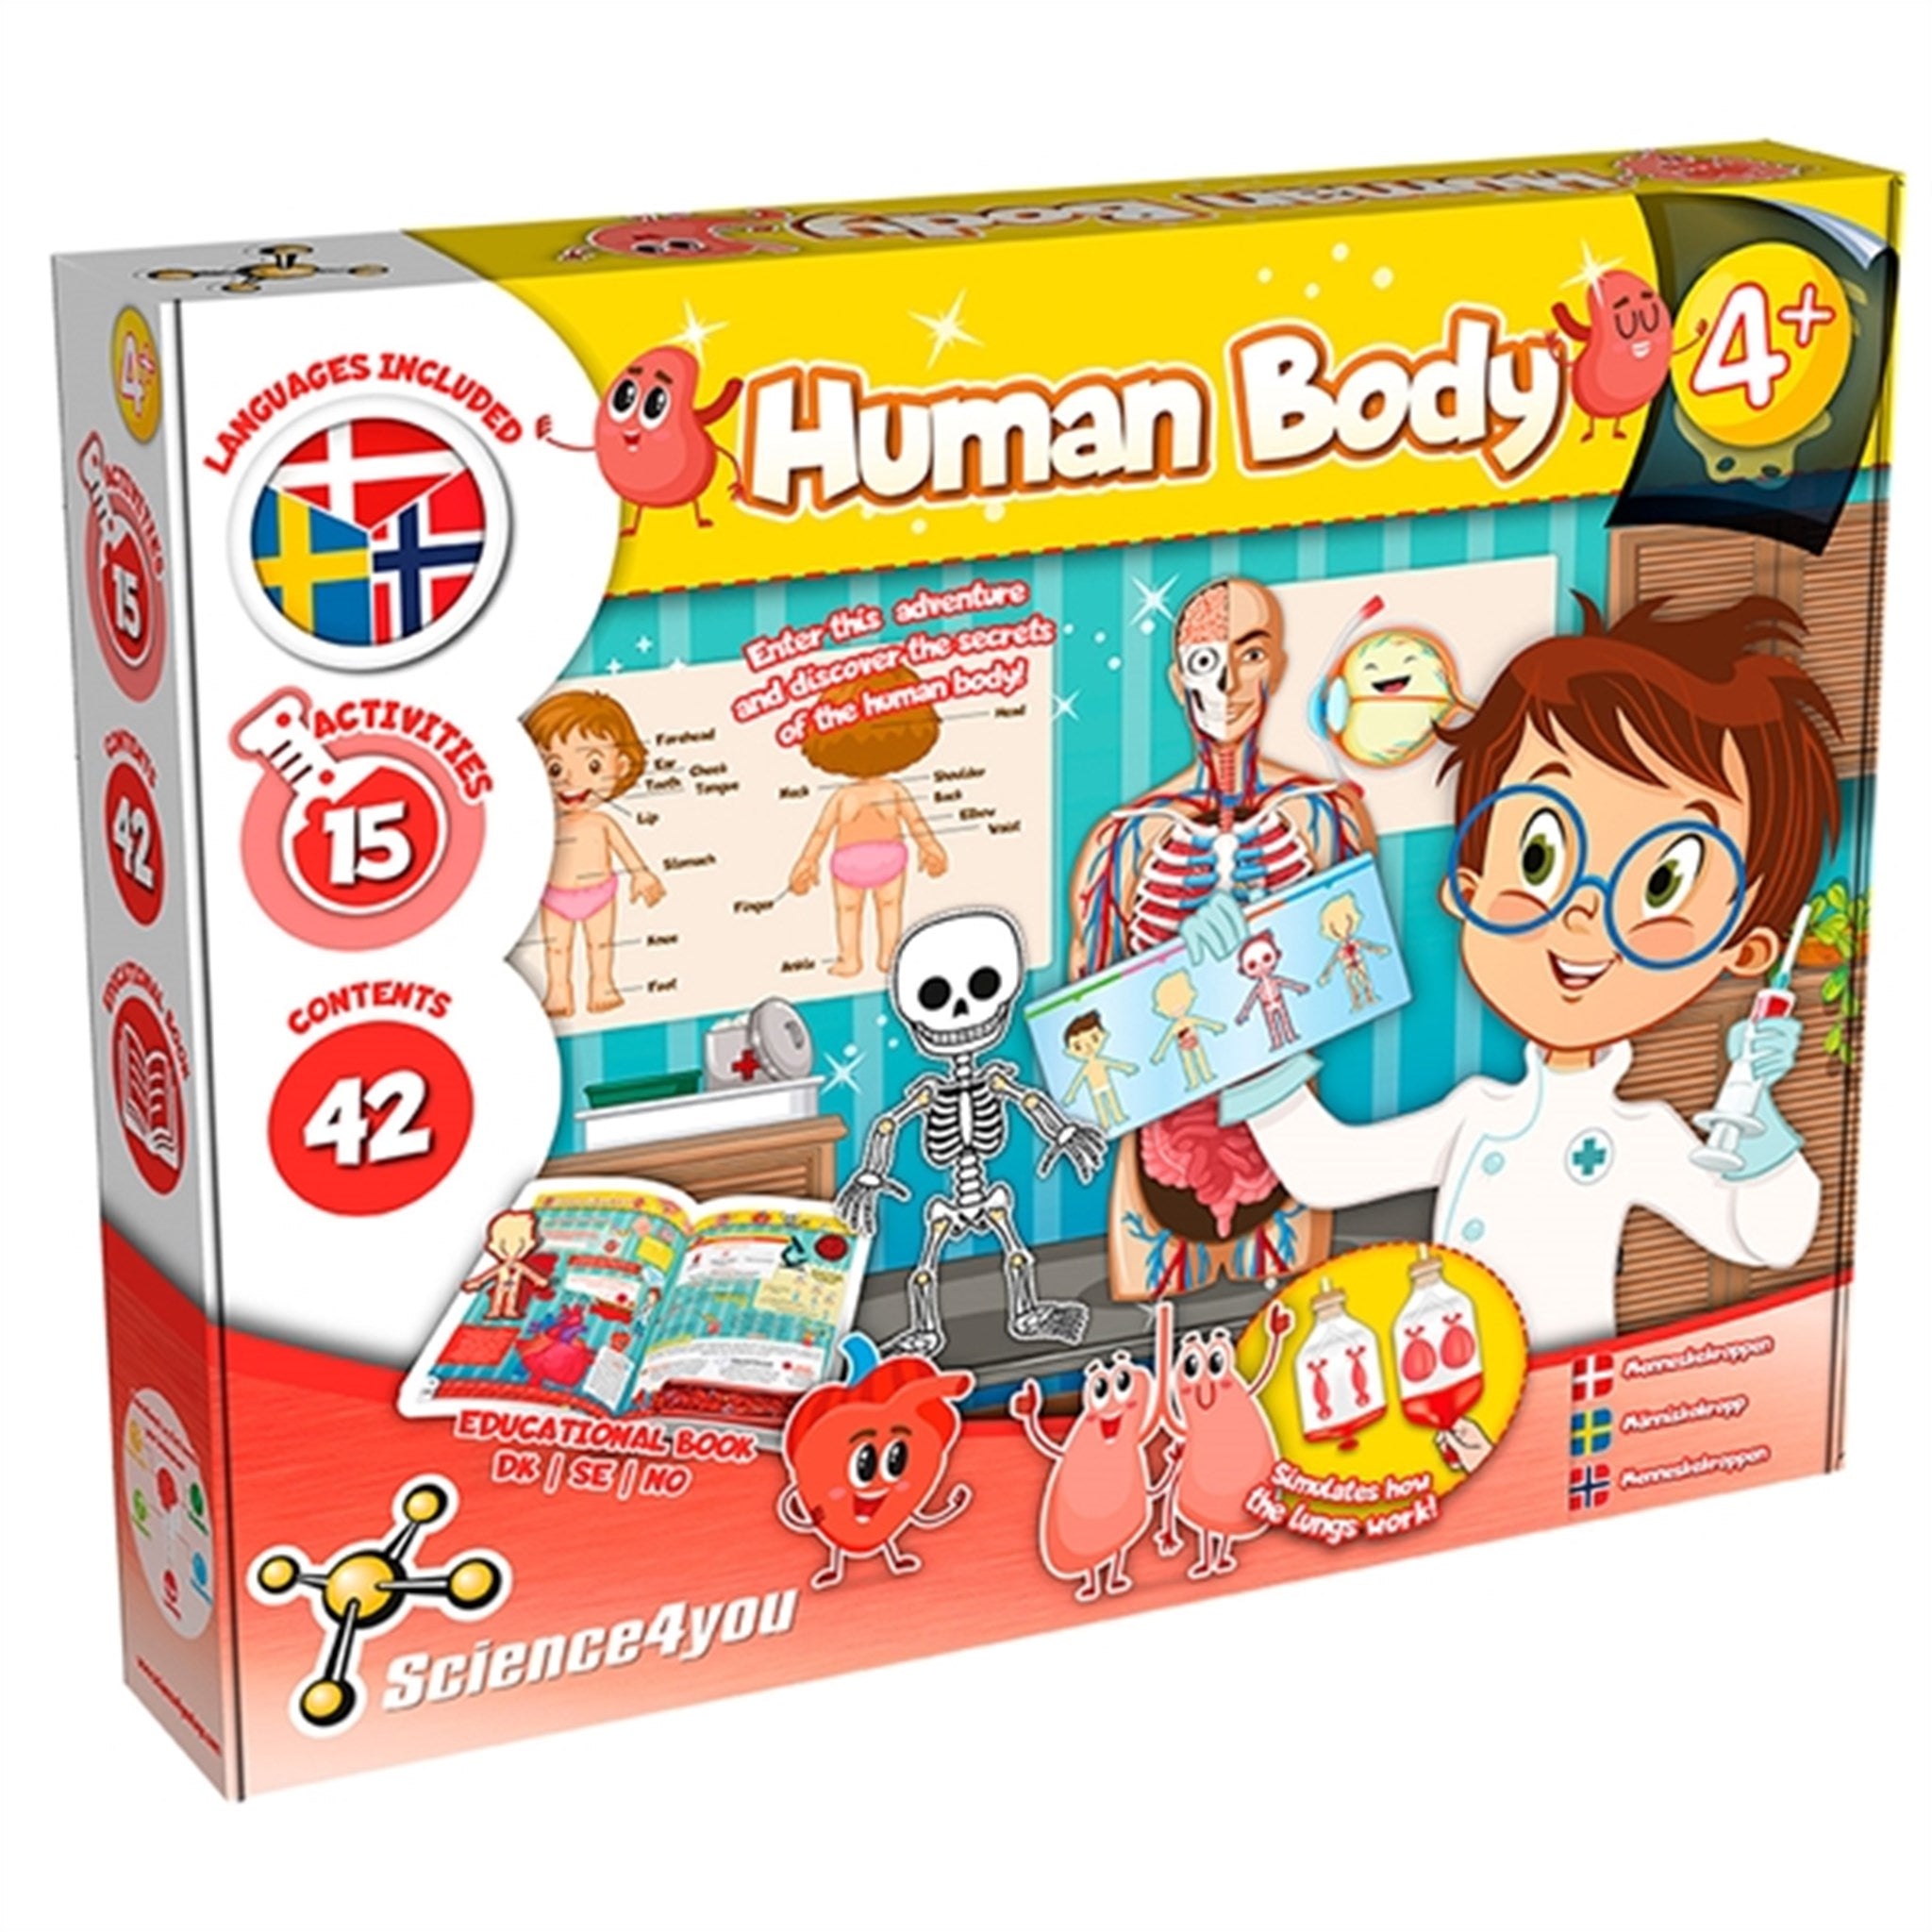 Science4you Human Body